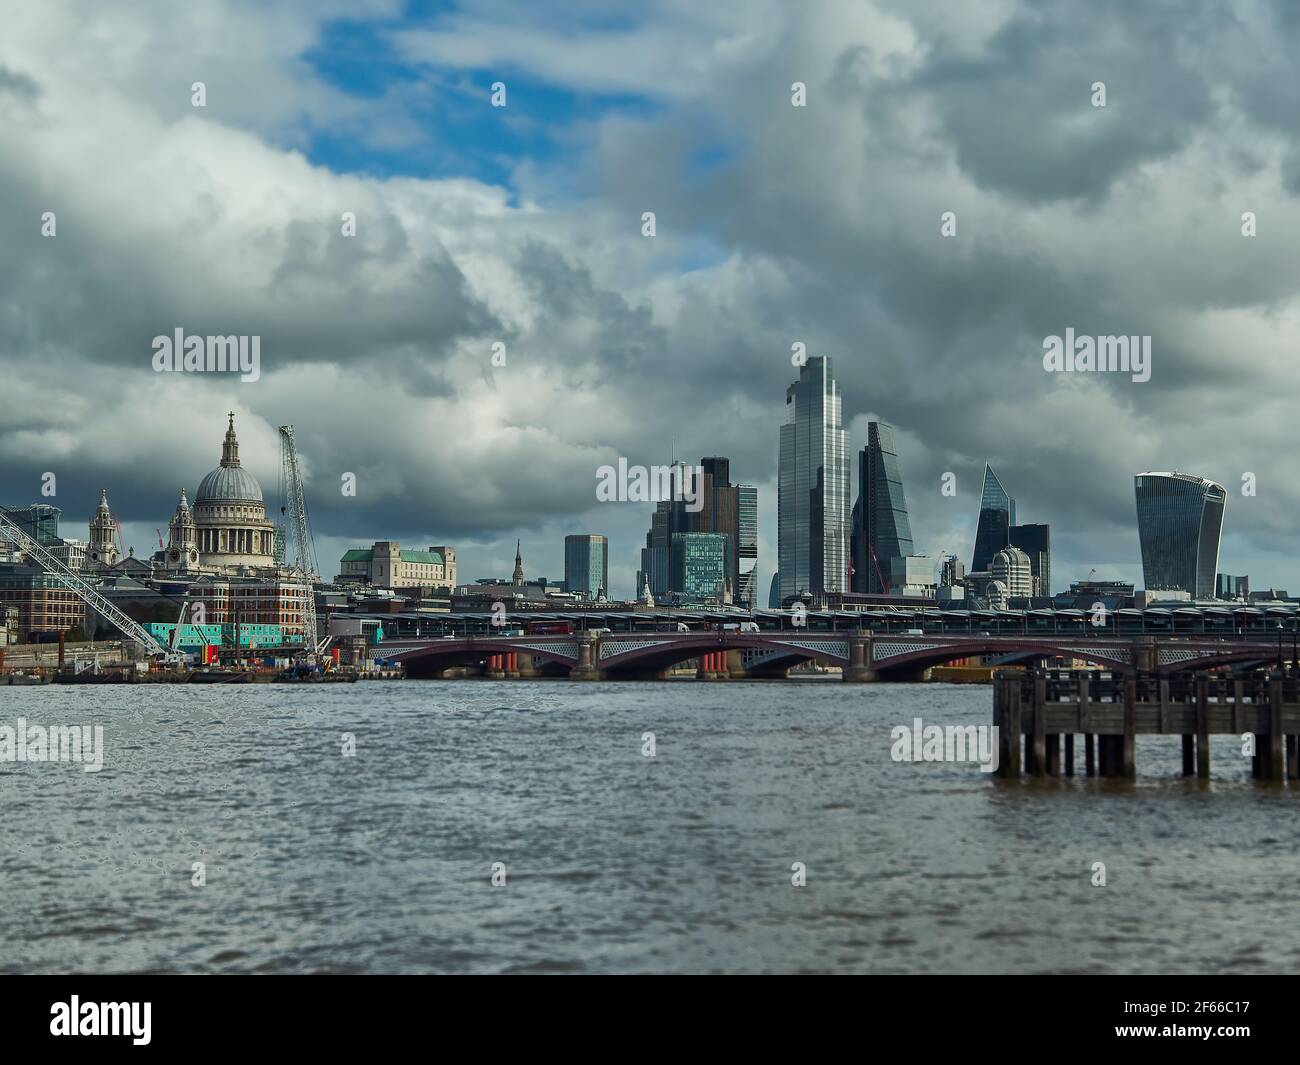 The City of London from the South Bank across a steely Thames, taking in the modern skyscrapers as well as the more traditional St. Paul’s Cathedral. Stock Photo